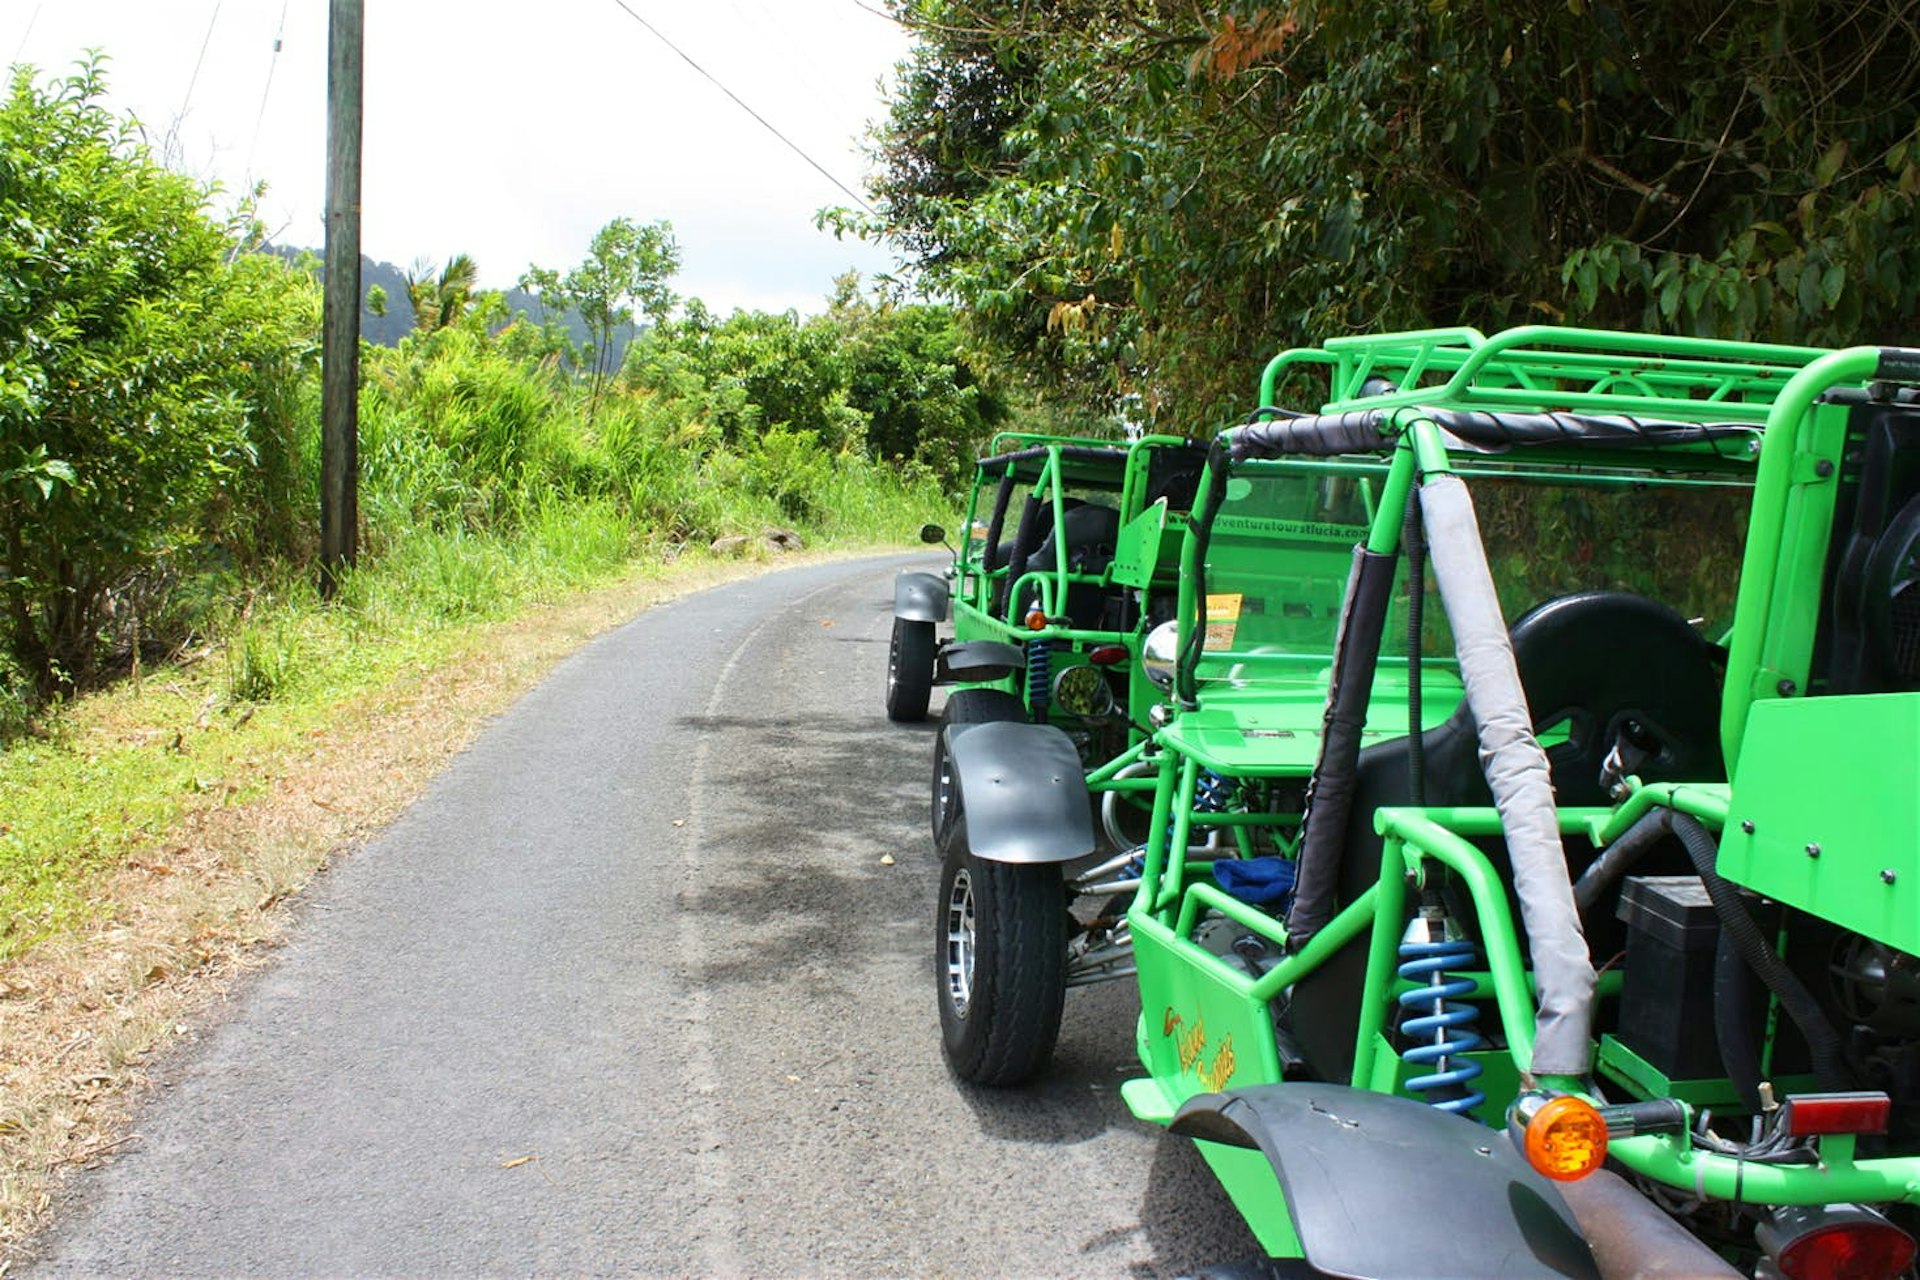 Island buggies: the best fun you can have on four wheels © Lorna Parkes / Lonely Planet